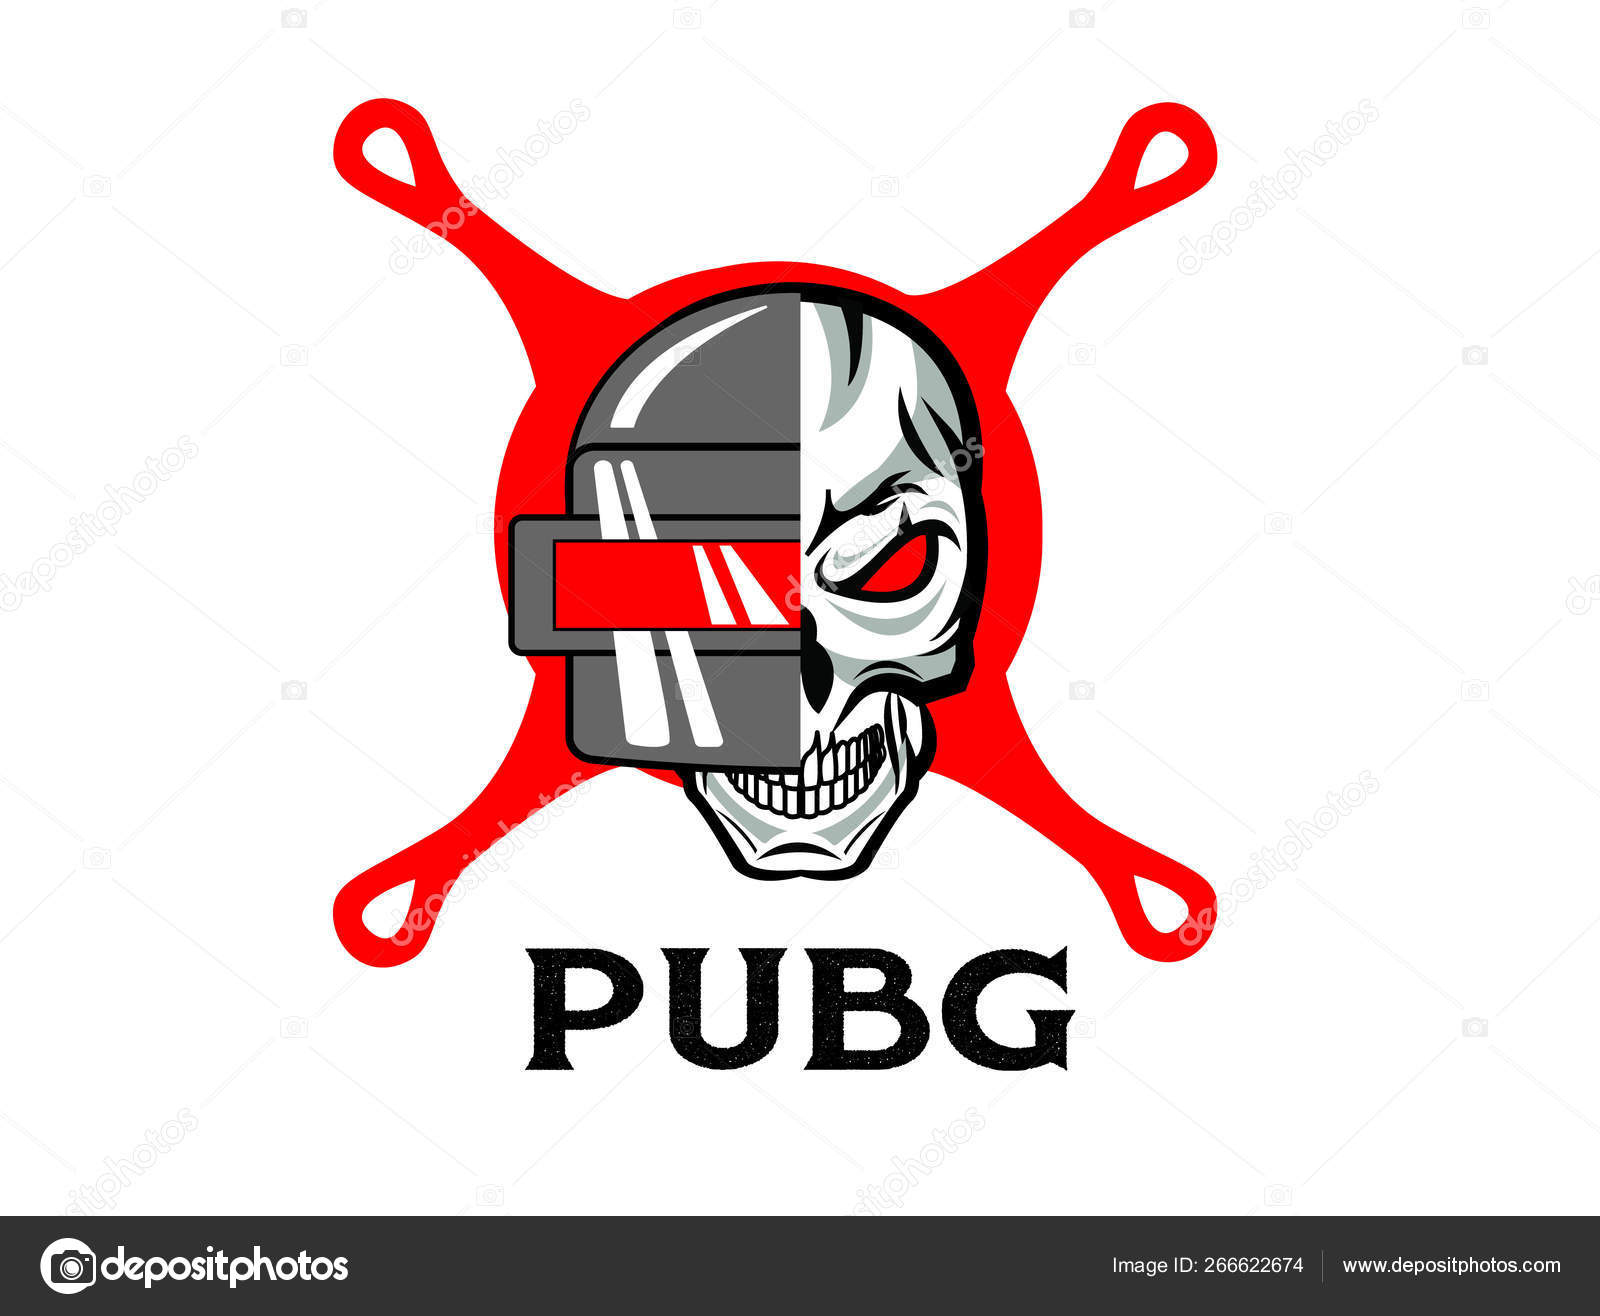 Pubg Playerunknowns Battlegrounds Game Vector Helmet From Playerunknowns Battleground Cartoon Illustration Stock Vector Image By C Mila1717